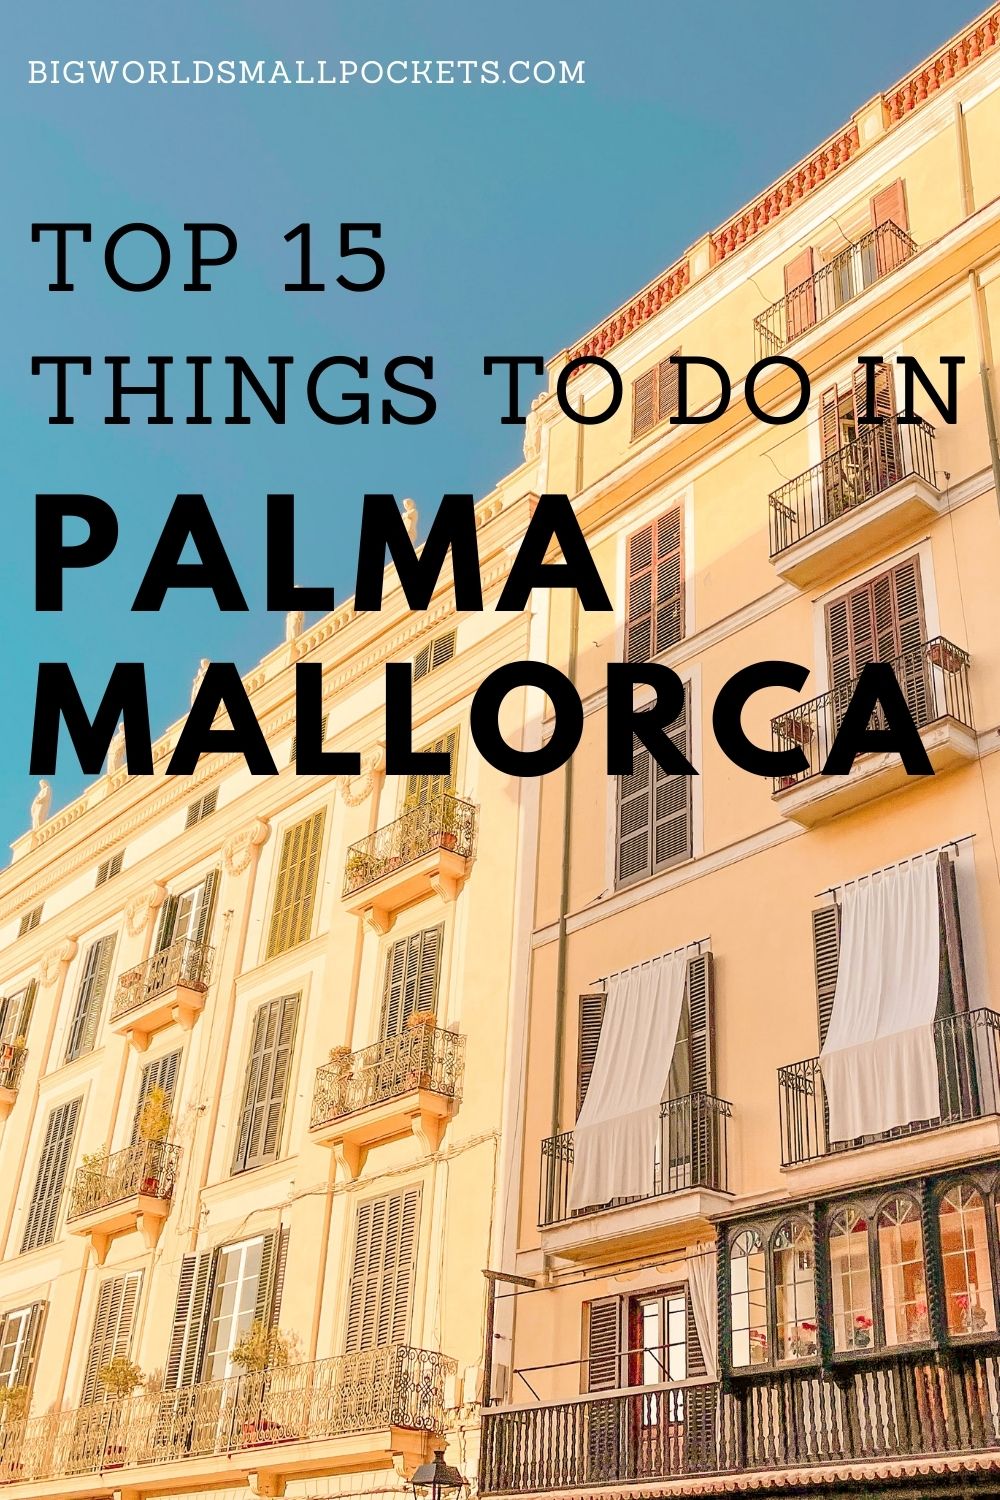 Top 15 Things to do in Palma, Mallorca